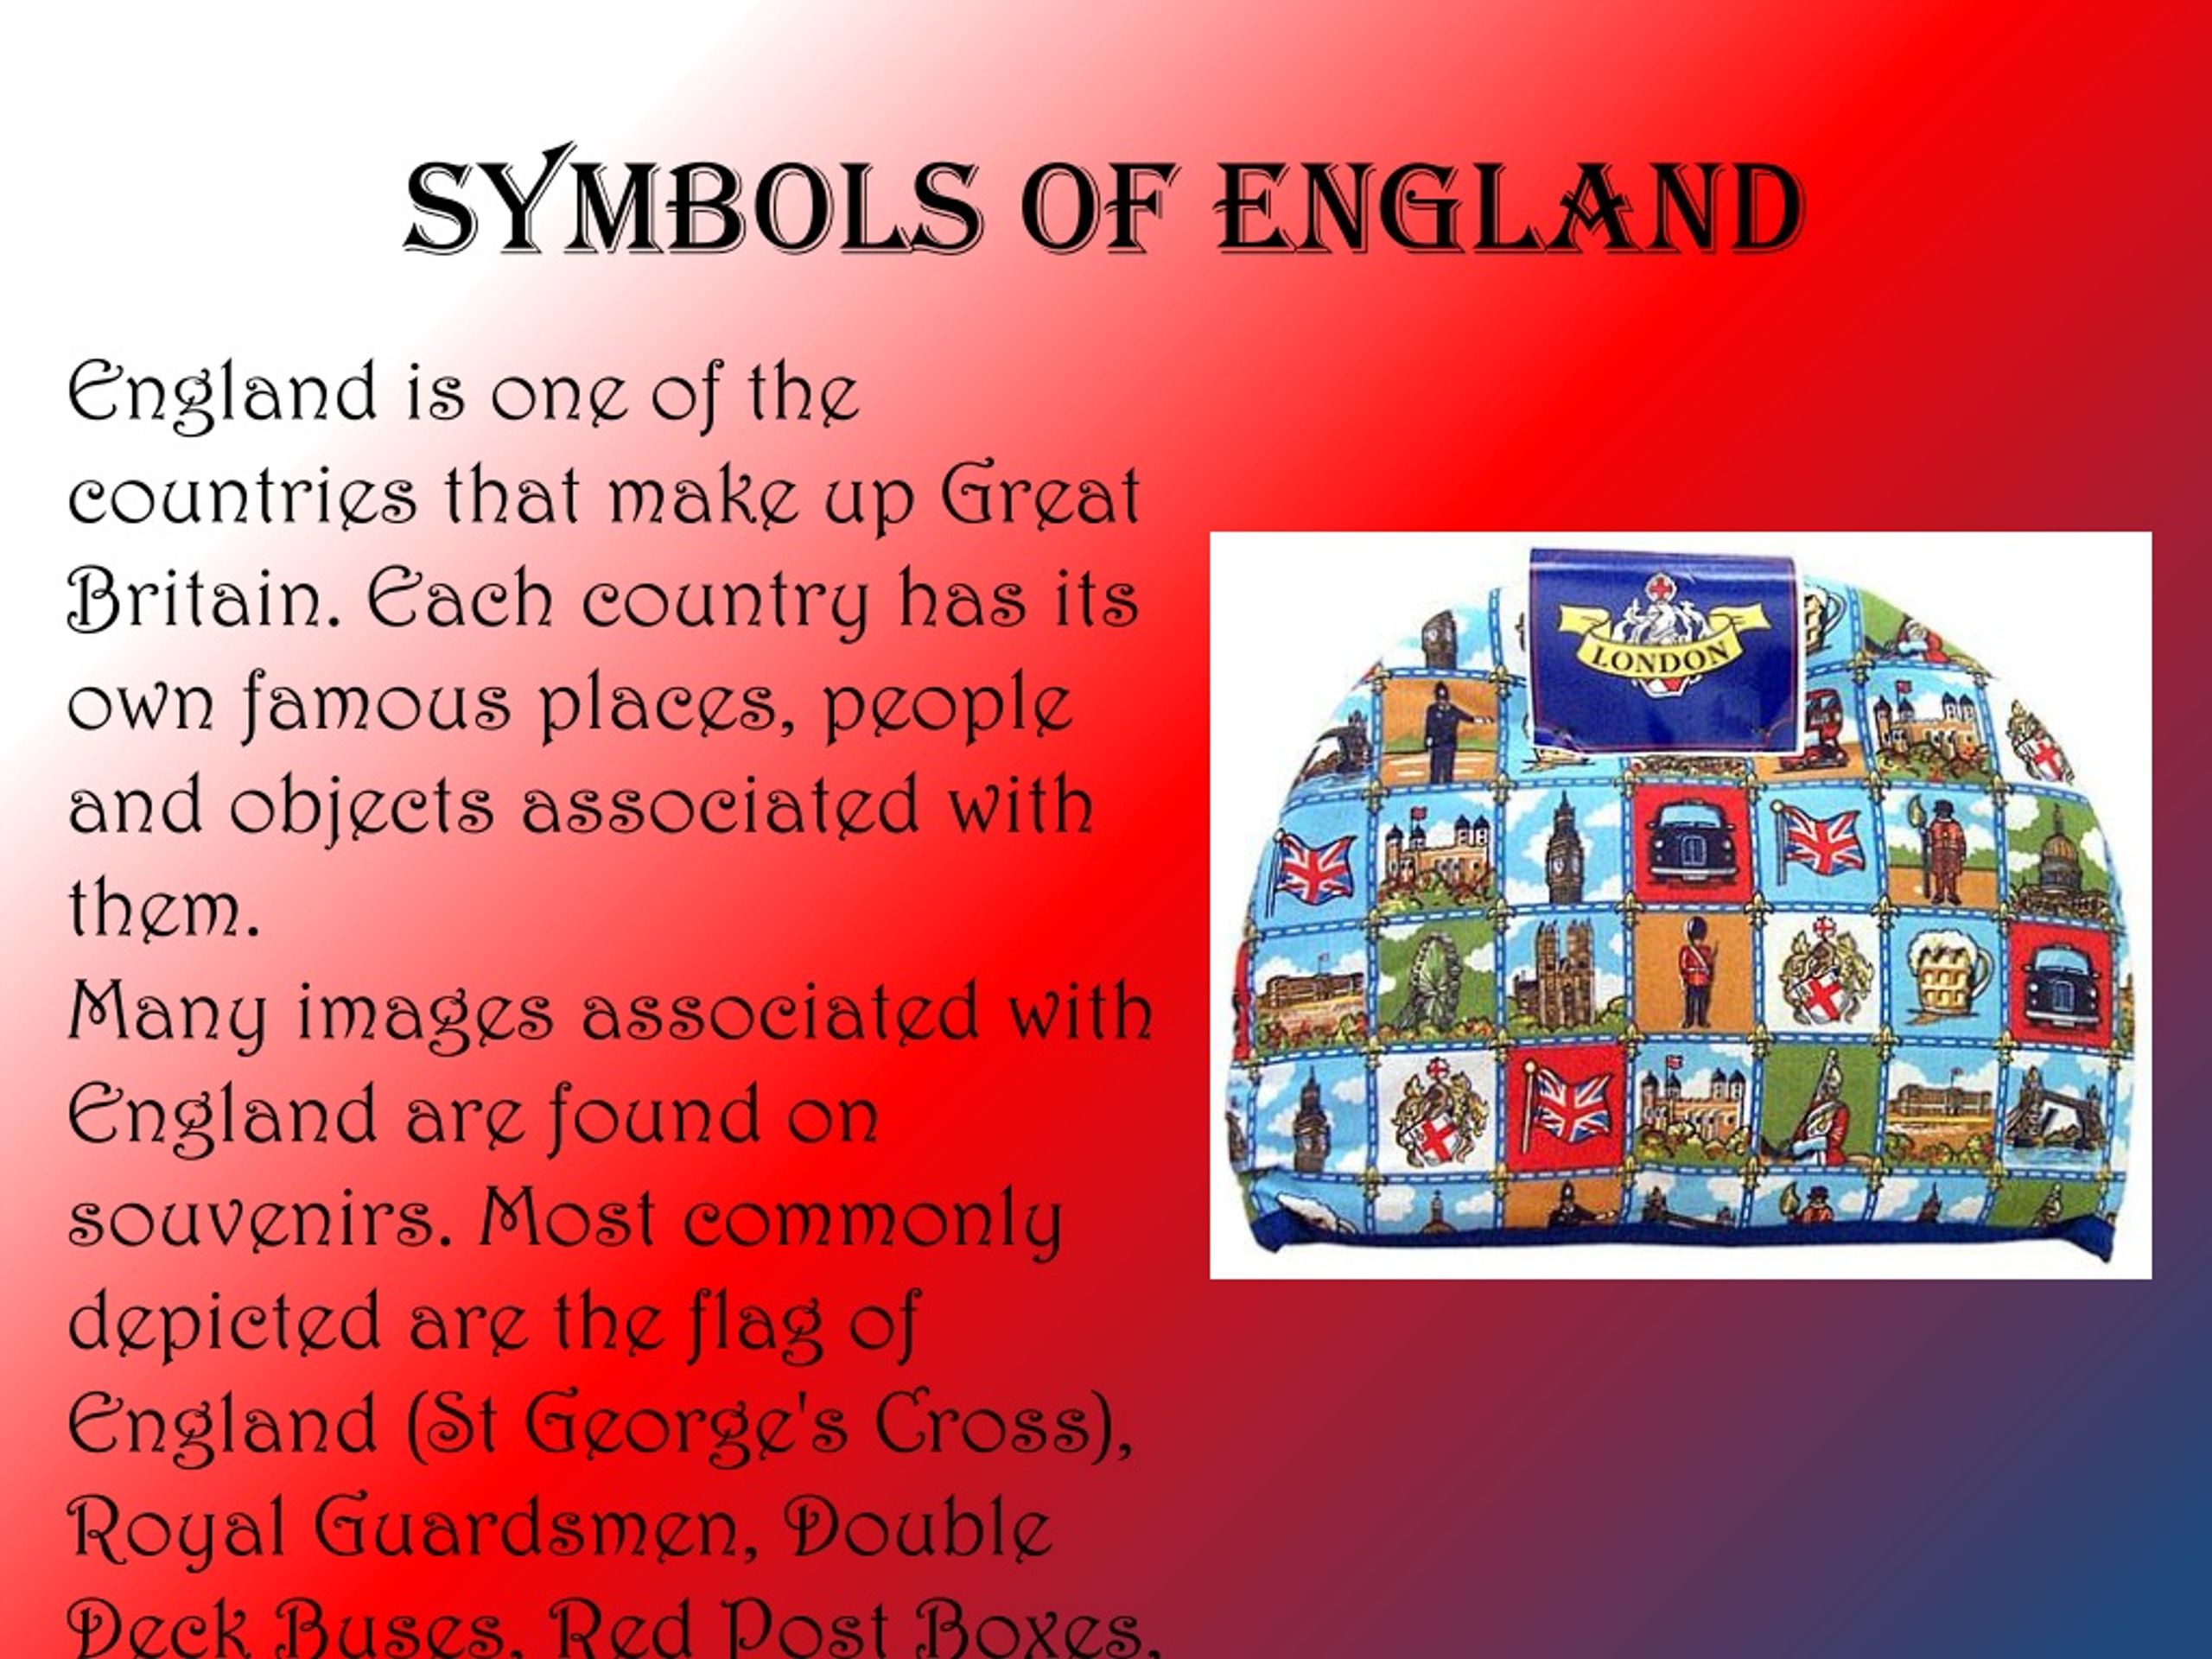 Each country has. England symbols. Символ England. Symbols of great Britain. The Culture of England для 5 класса.